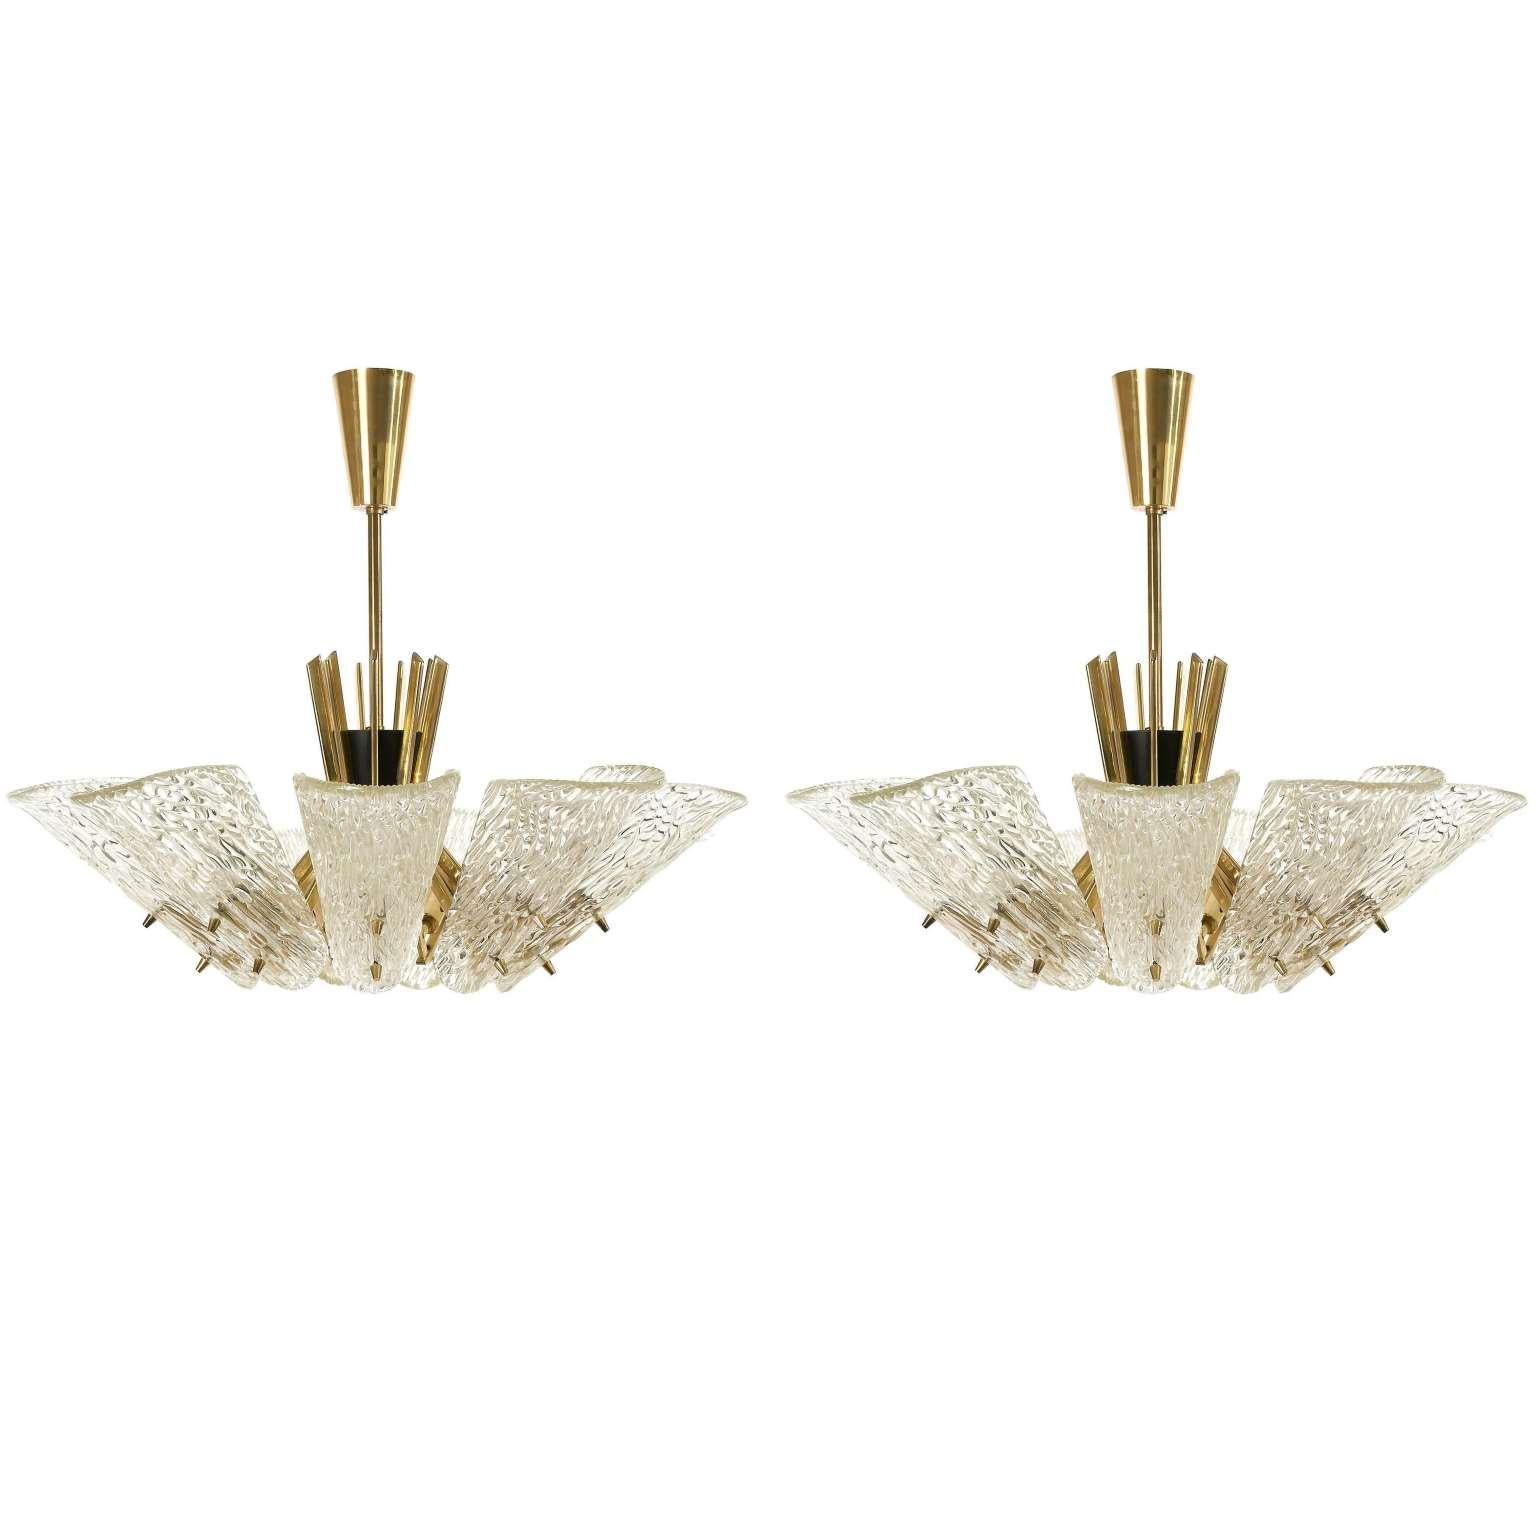 A set of two large glass and brass chandeliers by J.T. Kalmar, Austria, manufactured in Mid-Century, circa 1960 (late 1950s or early 1960s).
Each light has nine arms with sockets for small screw base E14 candelabra bulbs or LEDs (max. 40W per bulb)